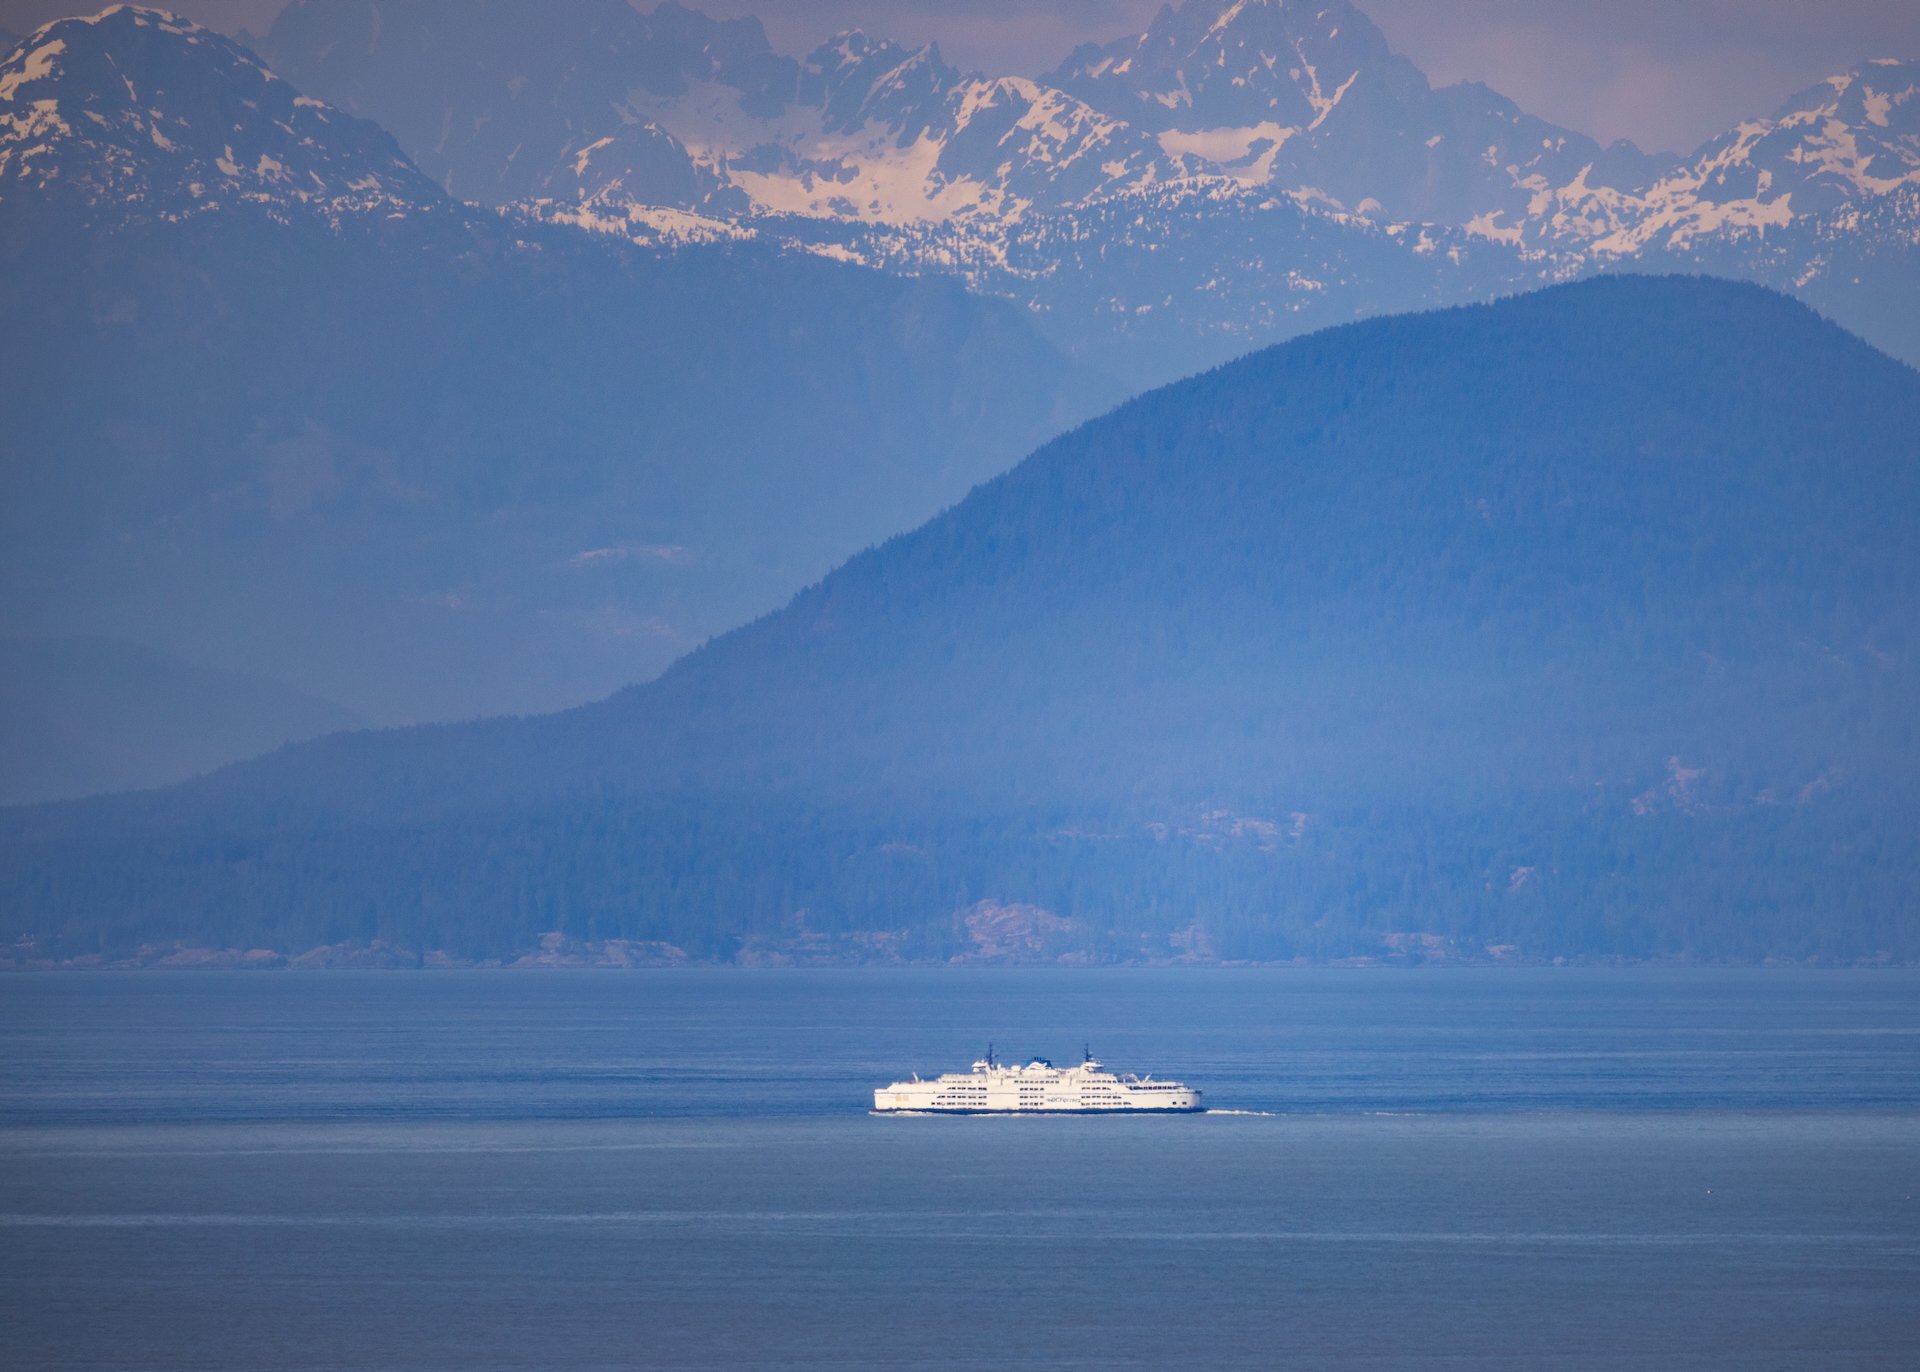  BC Ferries against the backdrop of the coastal mountains 